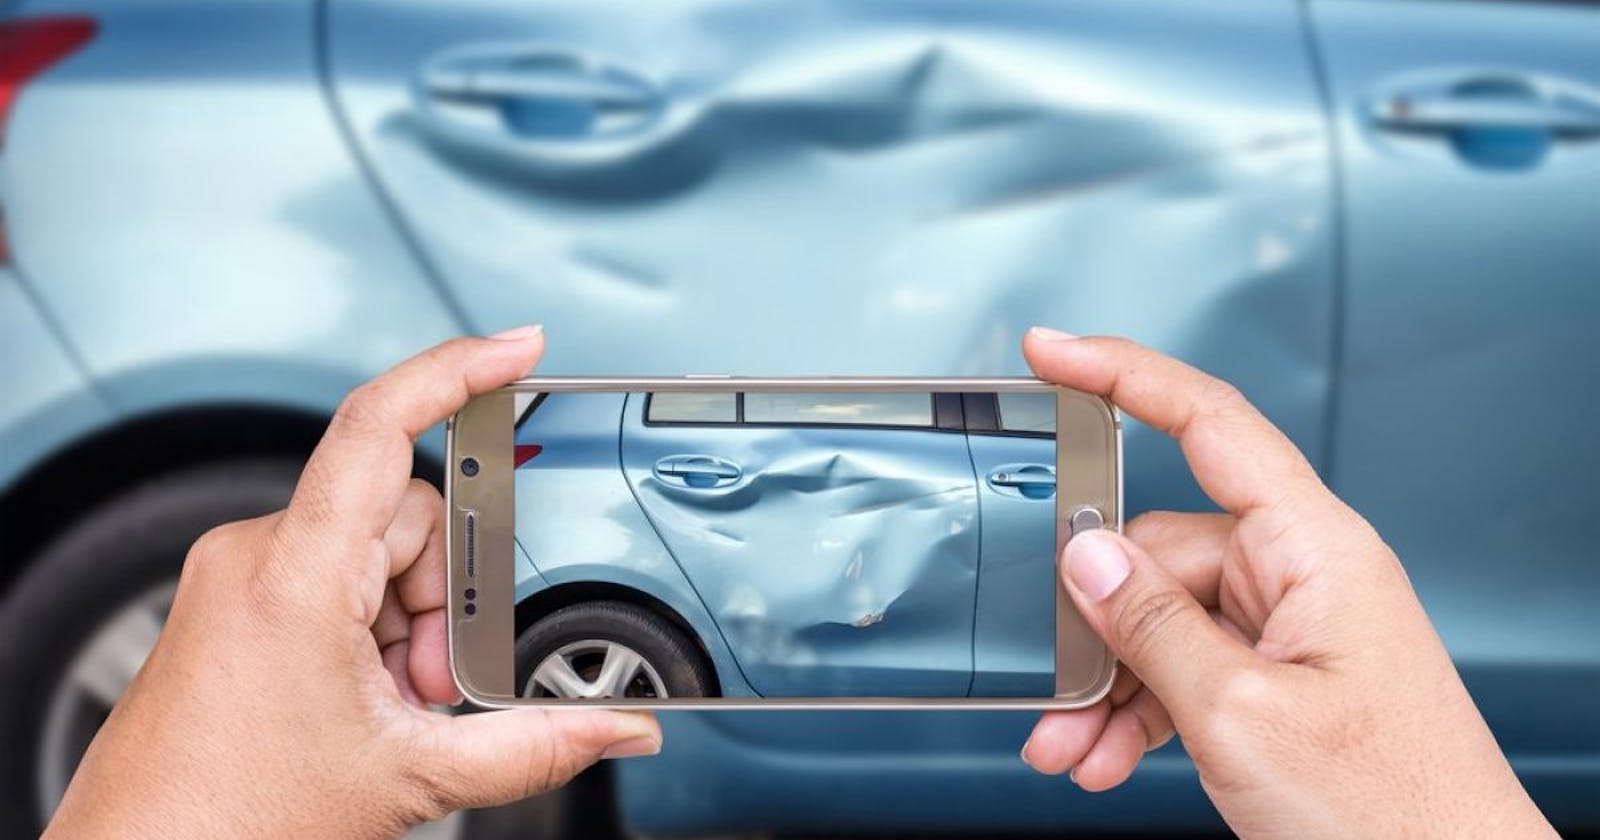 Automating Vehicle Damage Detection using Deep Learning: A Beginner Guide